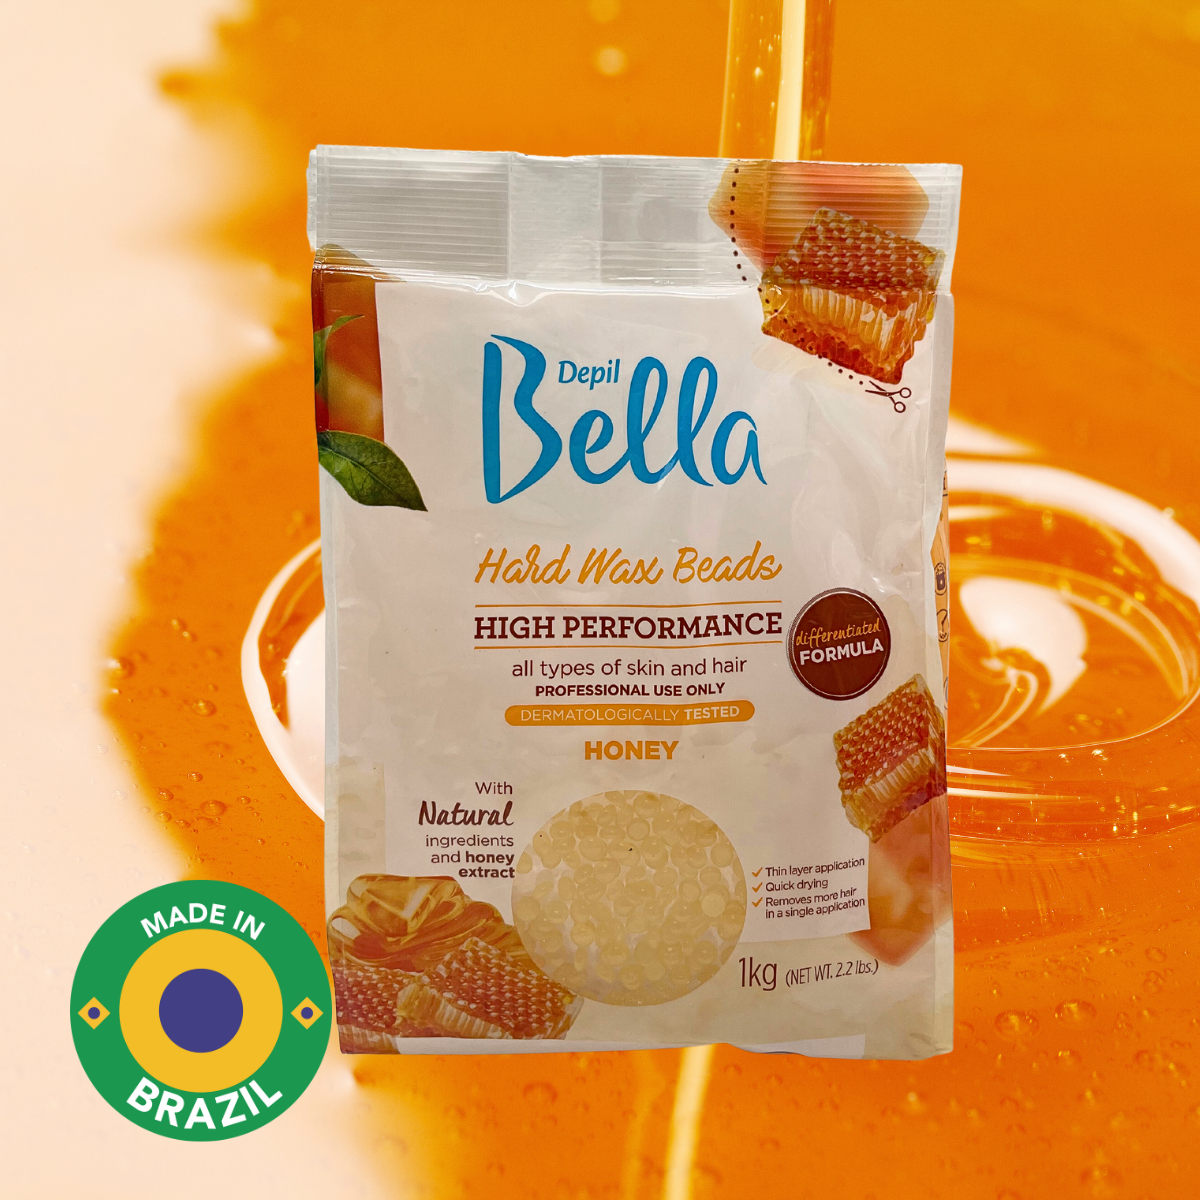 Depil Bella Honey Wax Beads with honey background for professional hair removal.